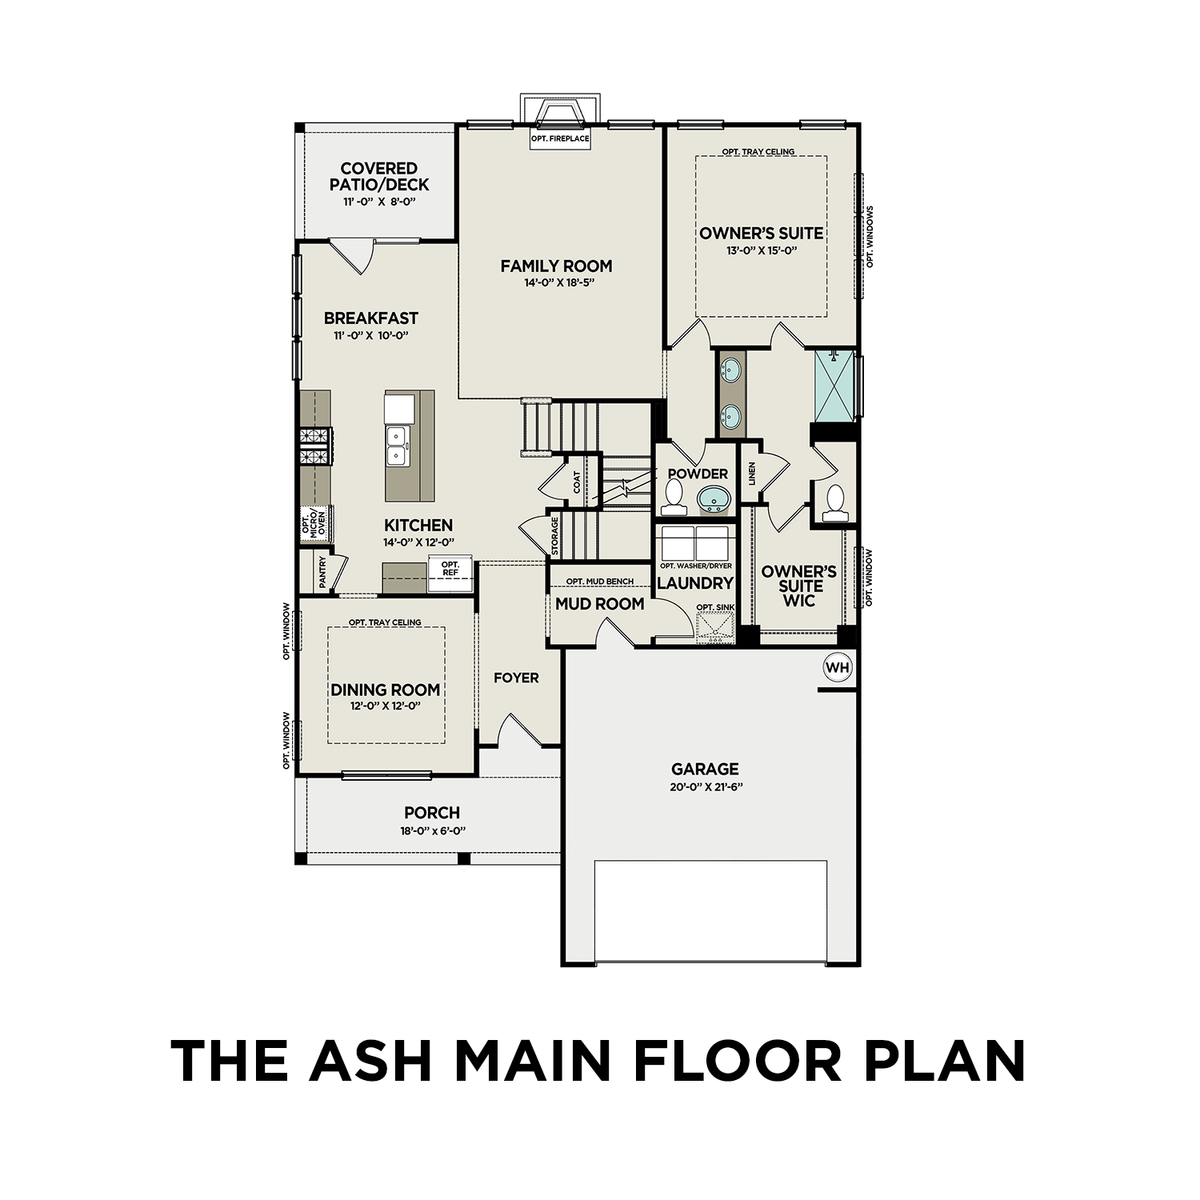 1 - The Ash A buildable floor plan layout in Davidson Homes' Carellton community.